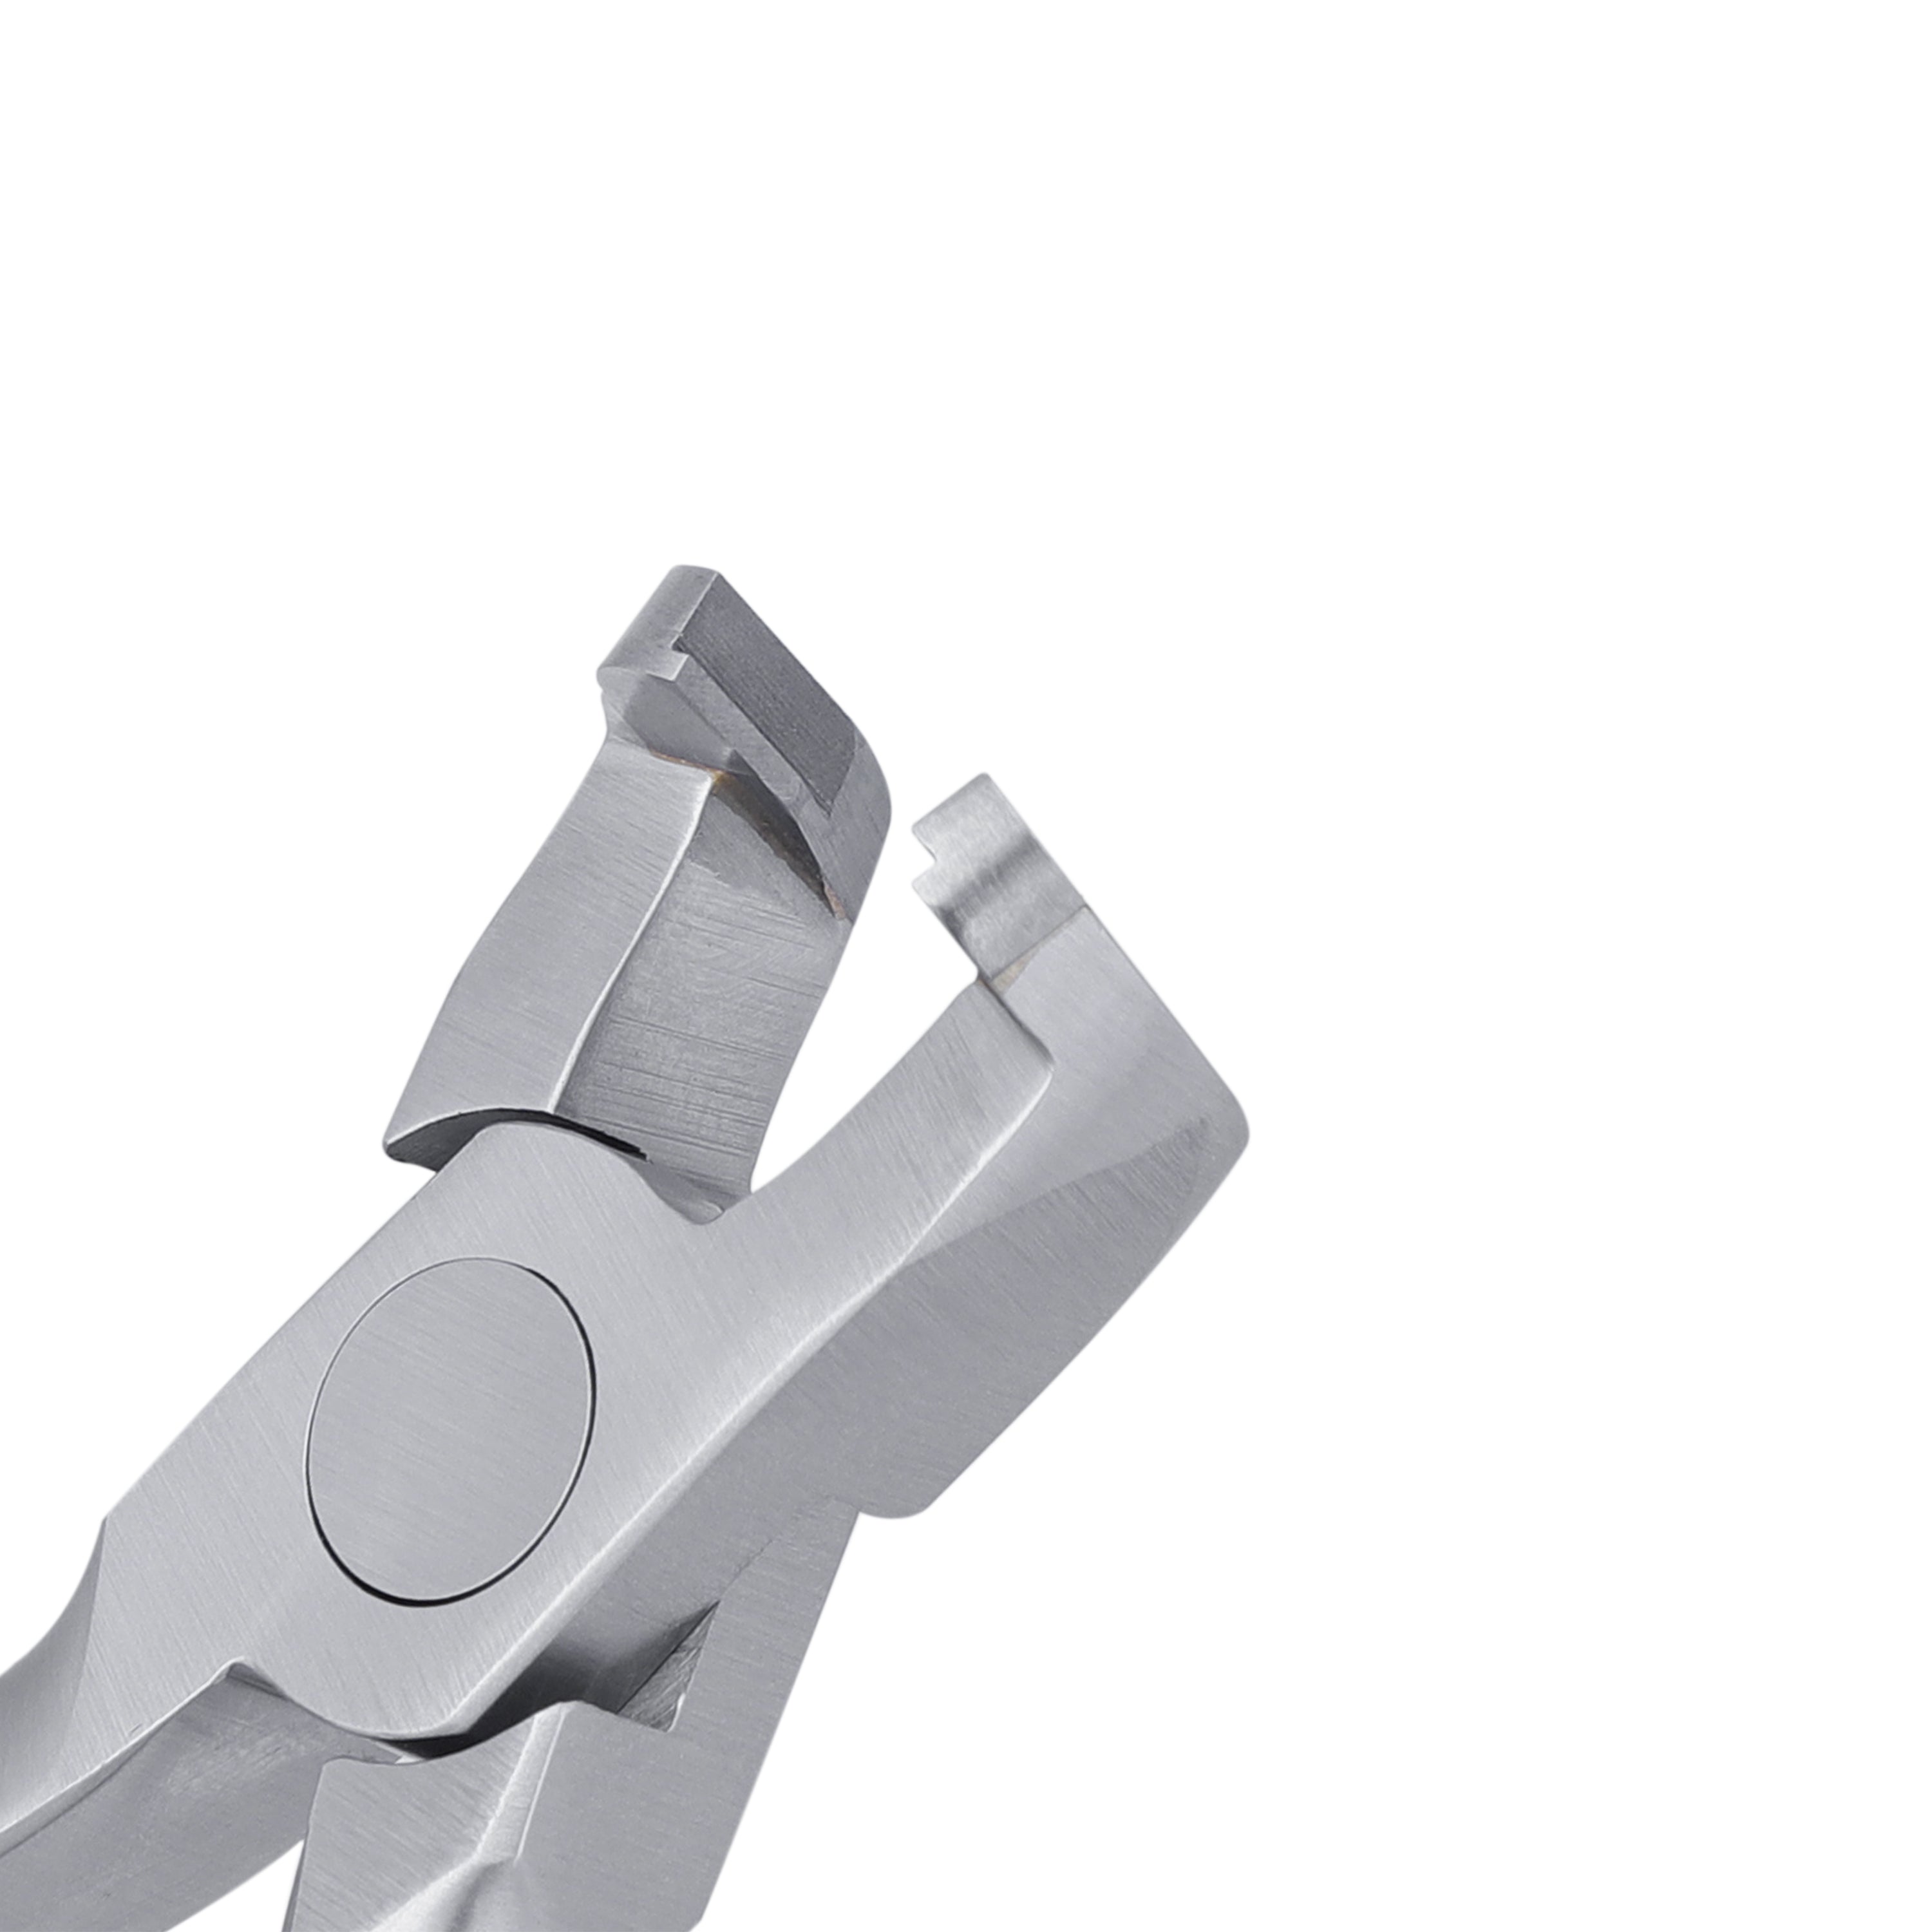 Universal Cut & Hold Distal End Cutter - HiTeck Medical Instruments